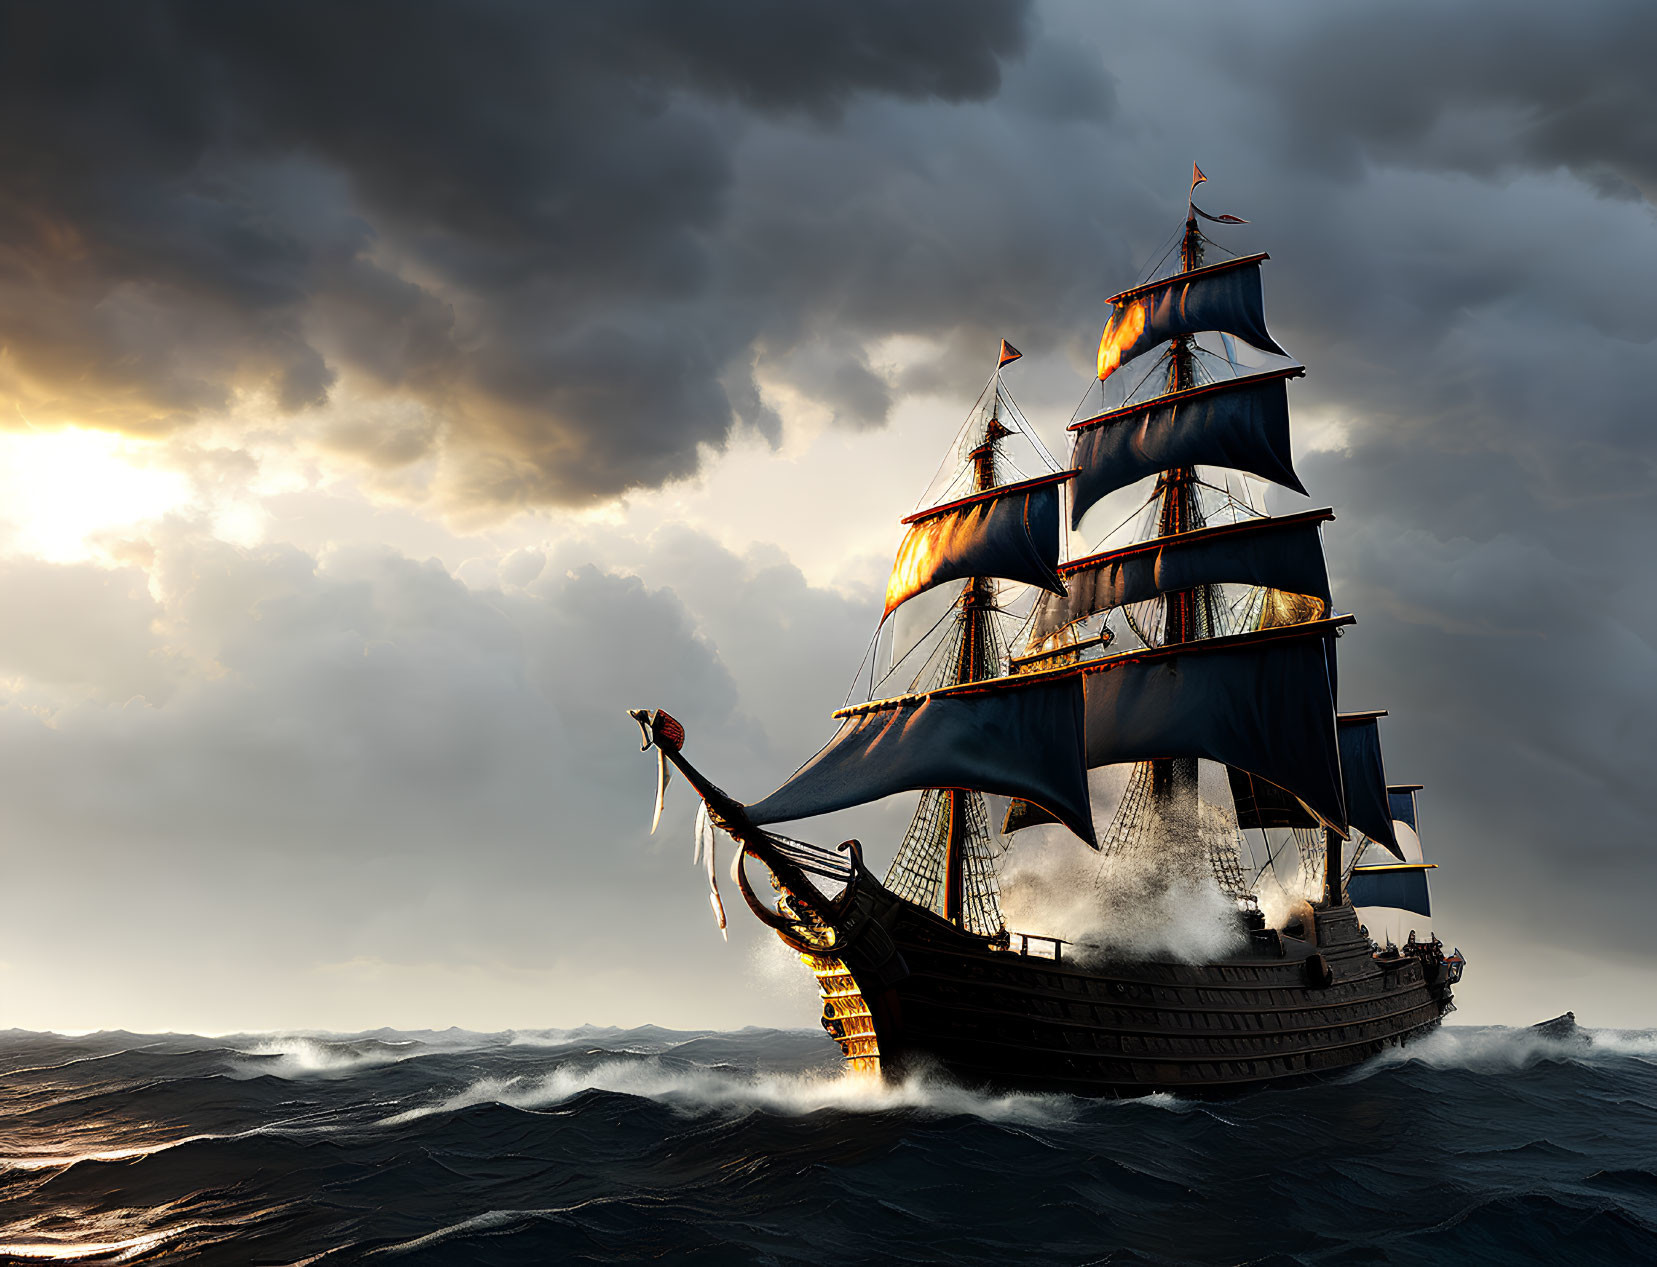 Sailing ship with billowing sails on turbulent ocean waves at sunset